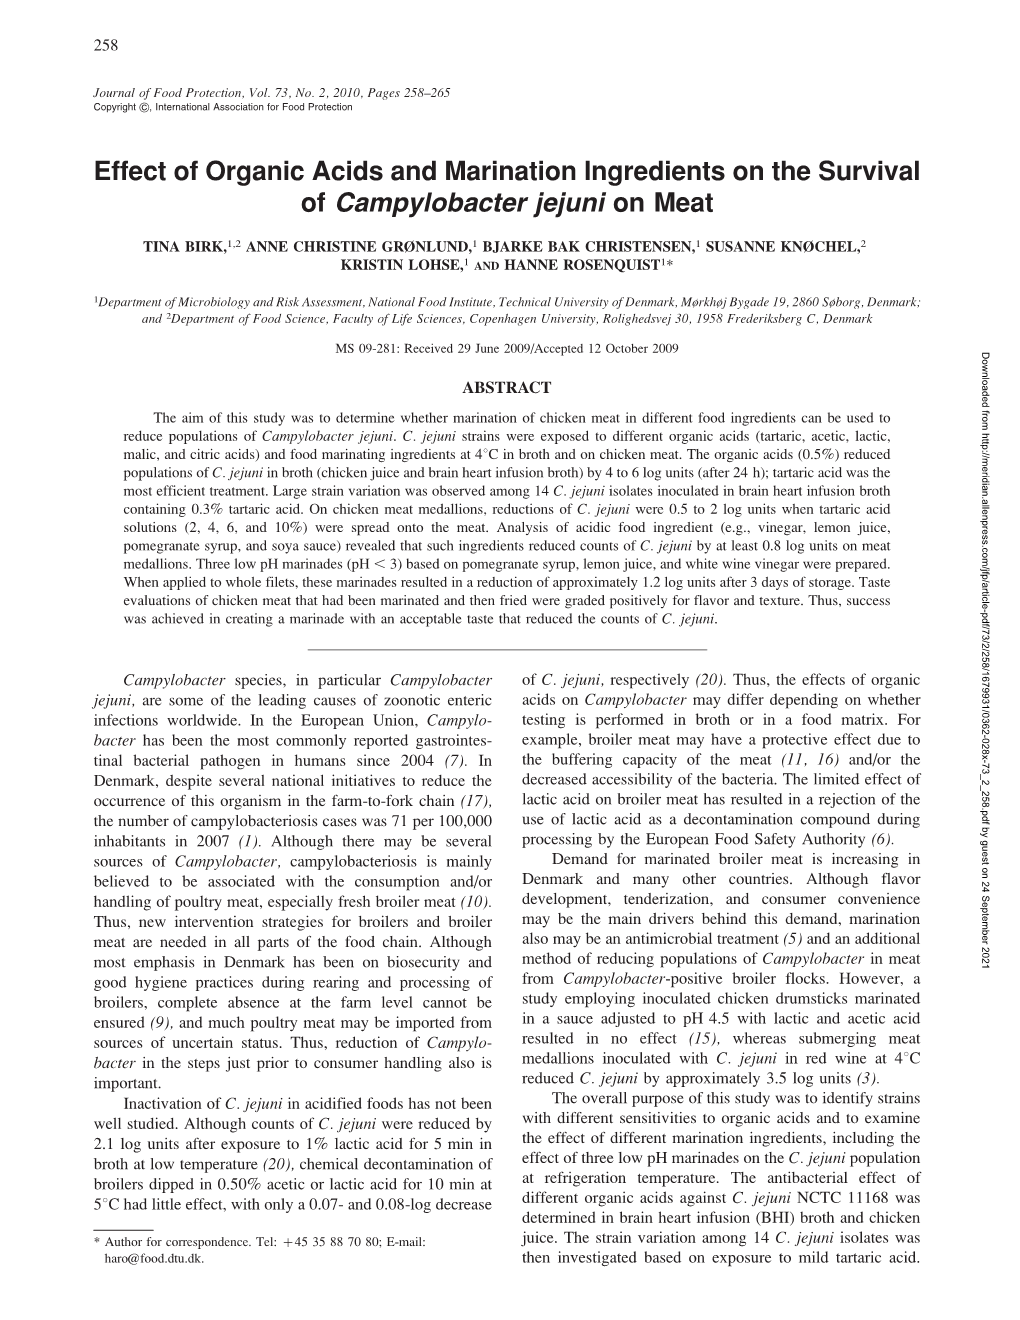 Effect of Organic Acids and Marination Ingredients on the Survival of &lt;I&gt;Campylobacter Jejuni&lt;/I&gt; on Meat